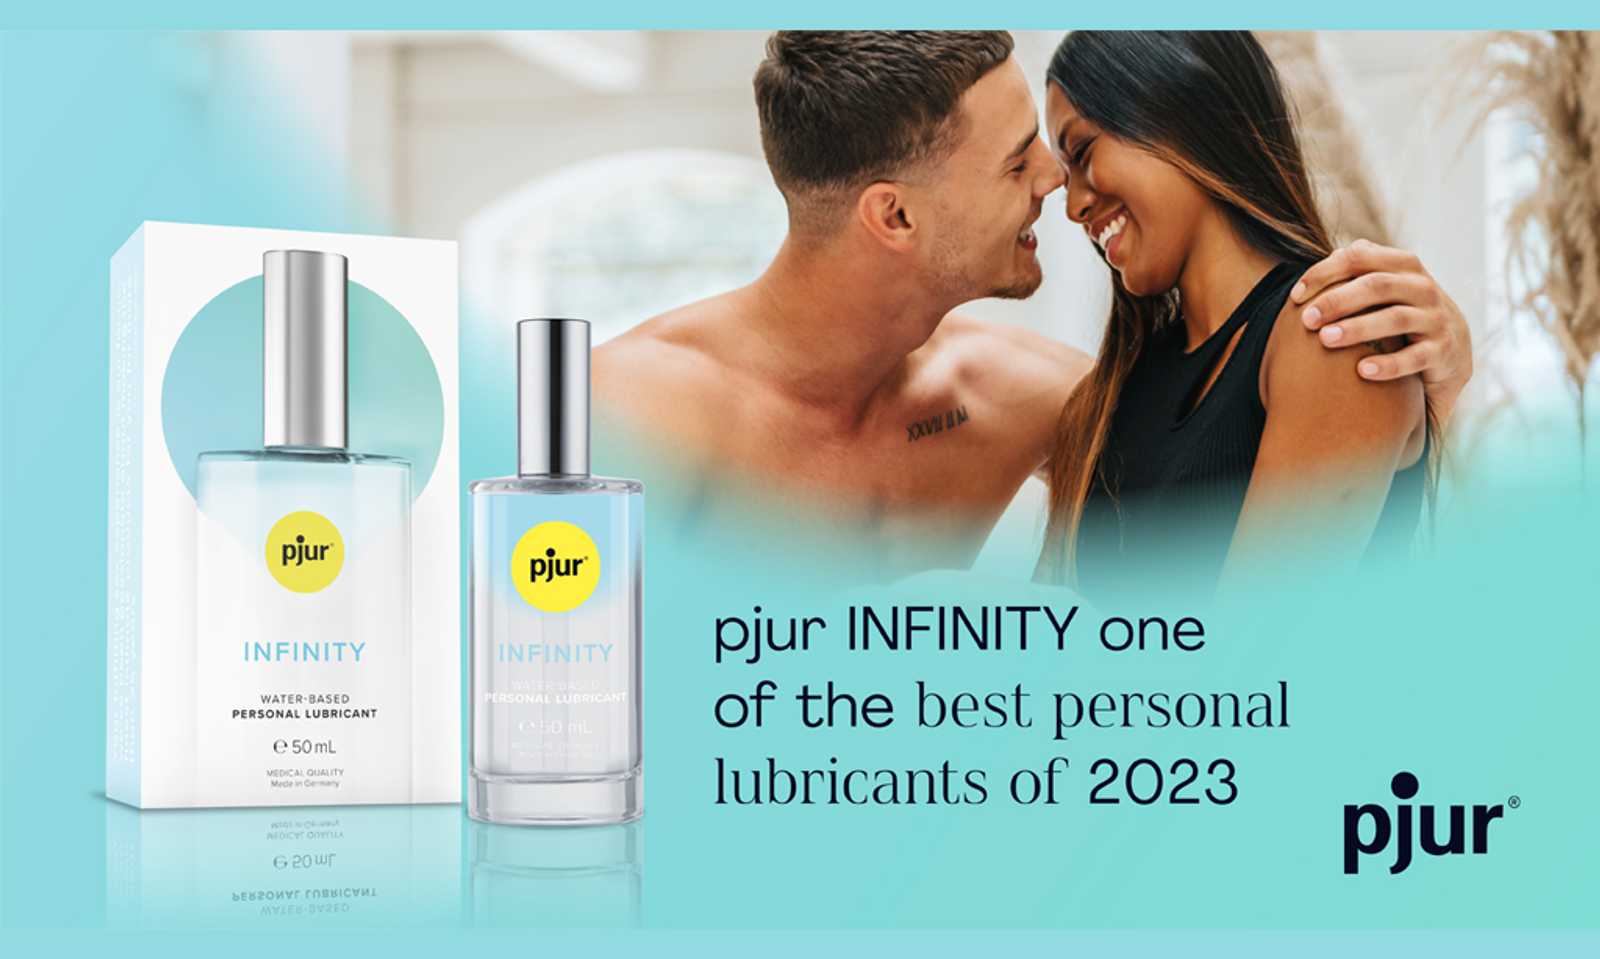 Glamour Germany Names pjur Infinity as One of Its Top Lubricants